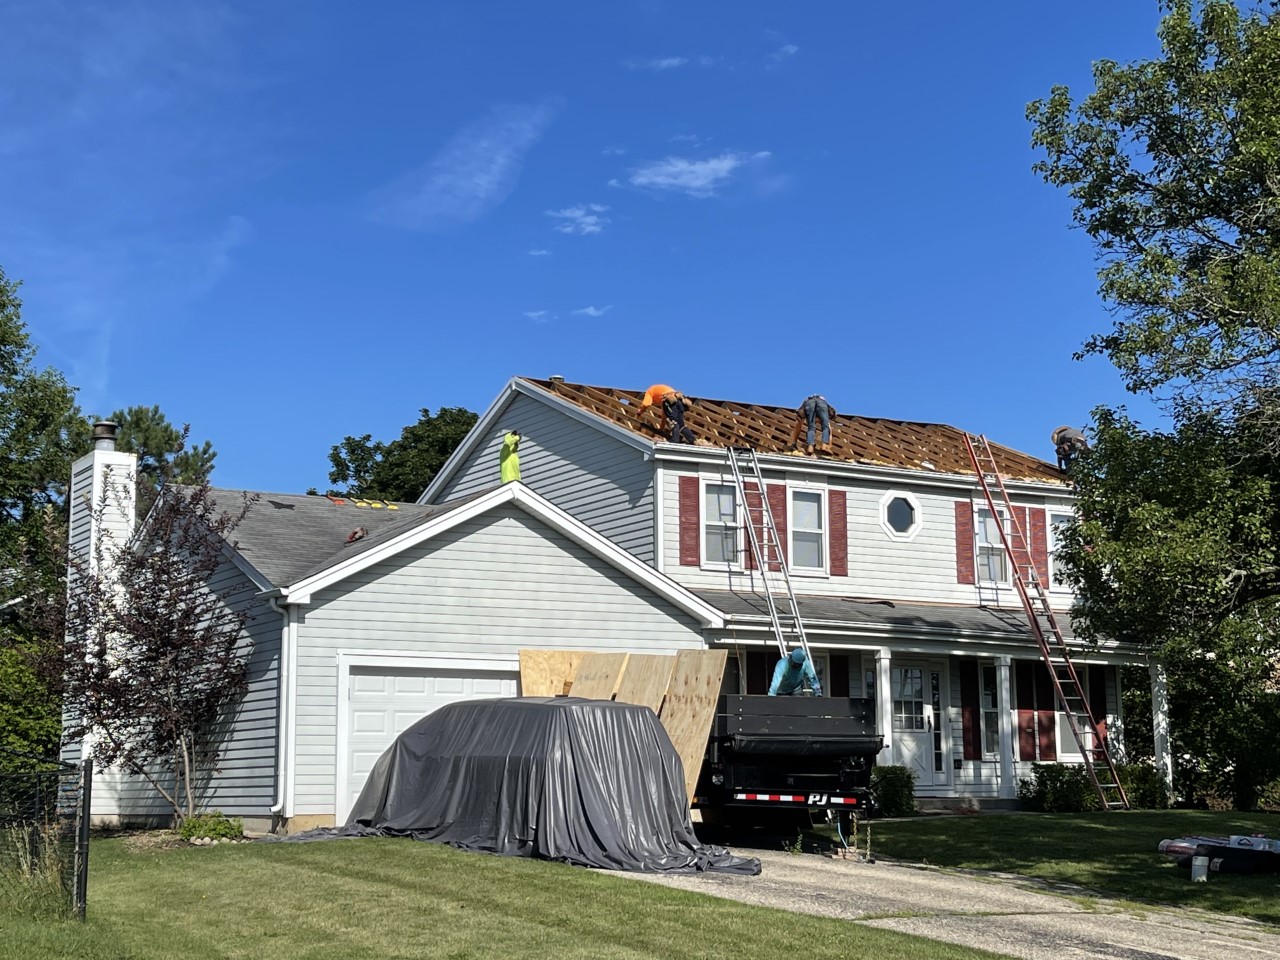 roofers installing a new roof base and shingles